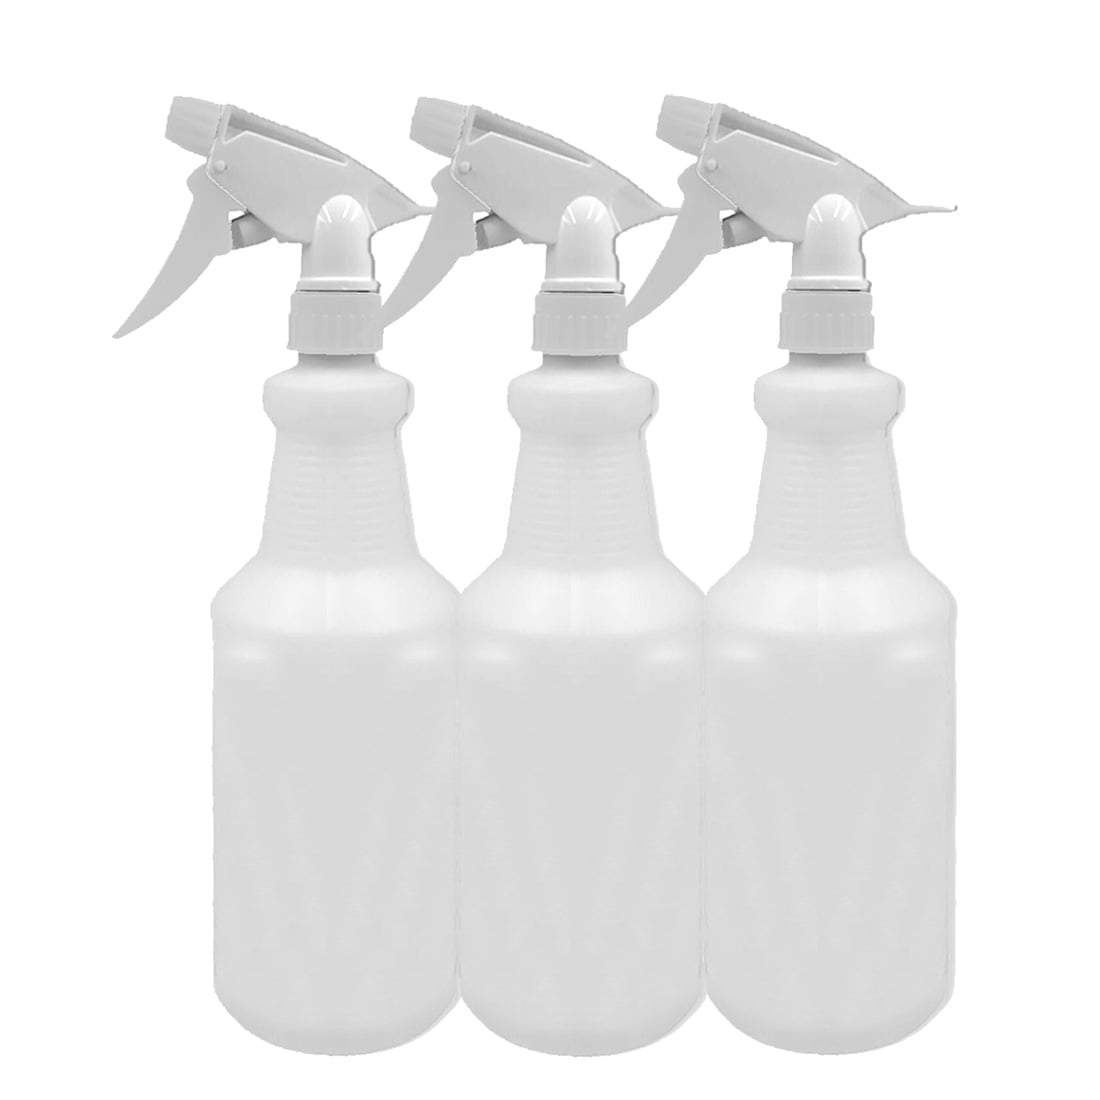 32 oz Empty Plastic Spray Bottle for Cleaning Solutions Measurements 3 Pack